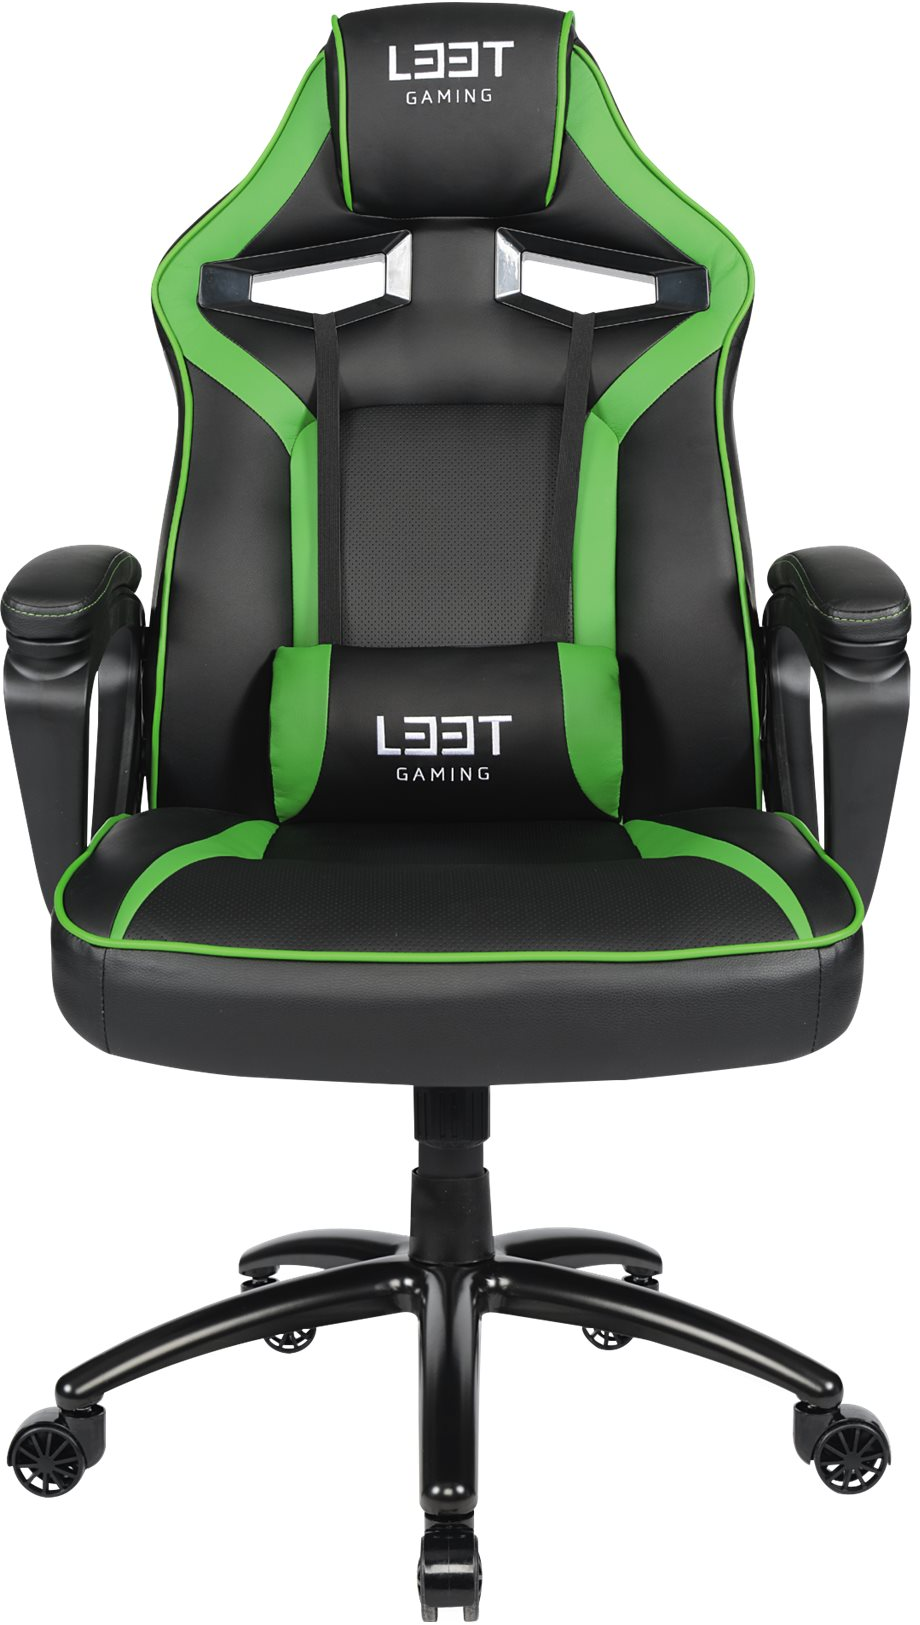 5706470075498 L33T Extreme Gaming stol - grøn - Gaming stol Computer & IT,Gaming,Gaming stole 74600160567 EXTR-GREEN